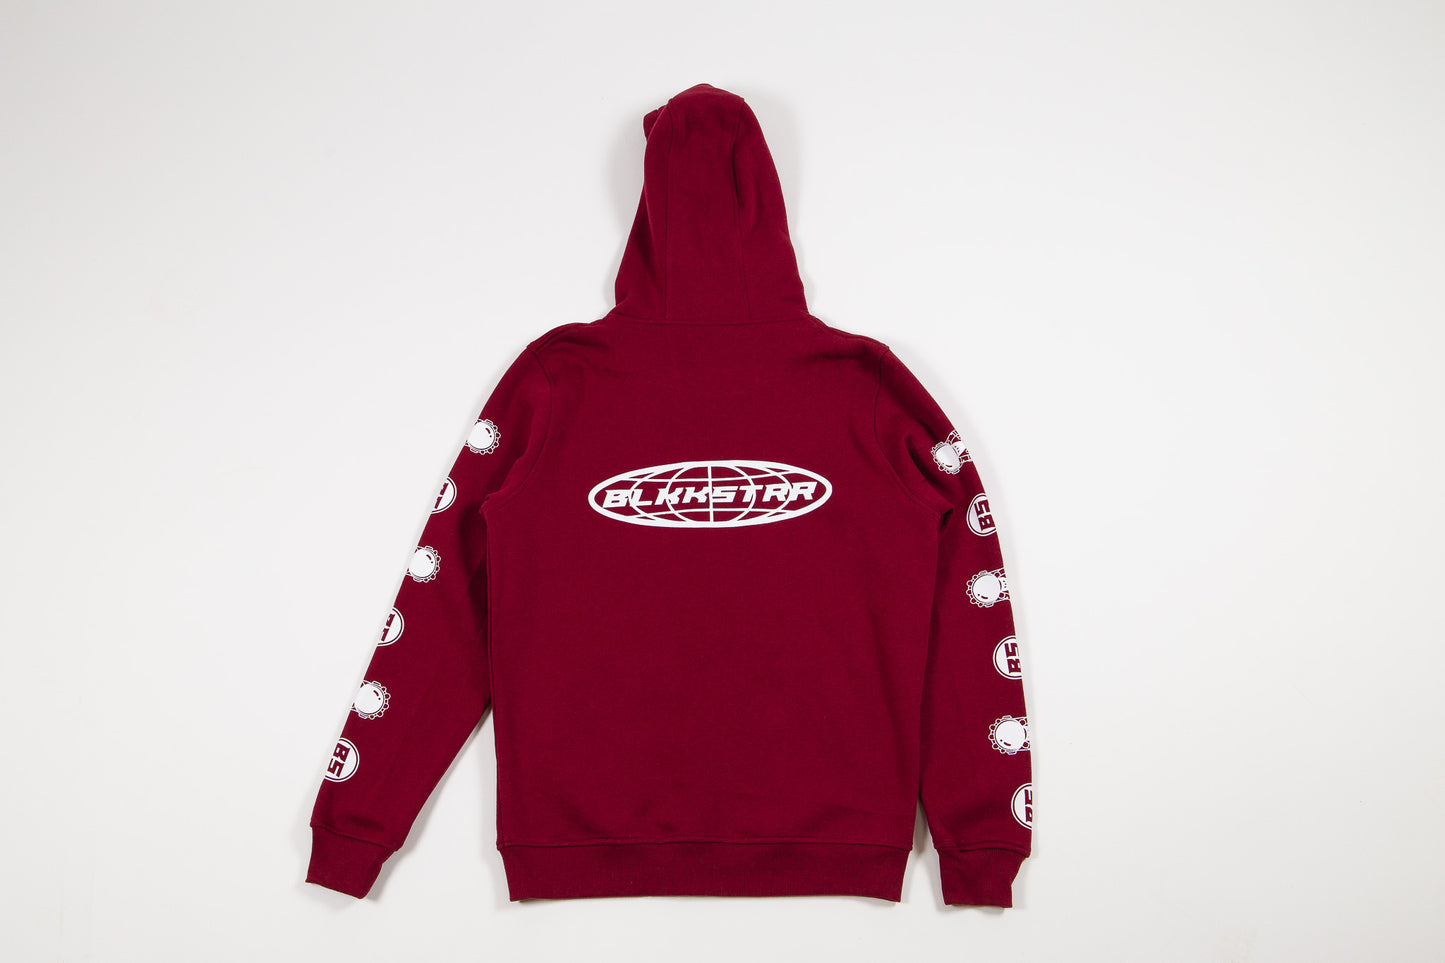 Embroided Astro PTTRN Ziphood - Blood Red